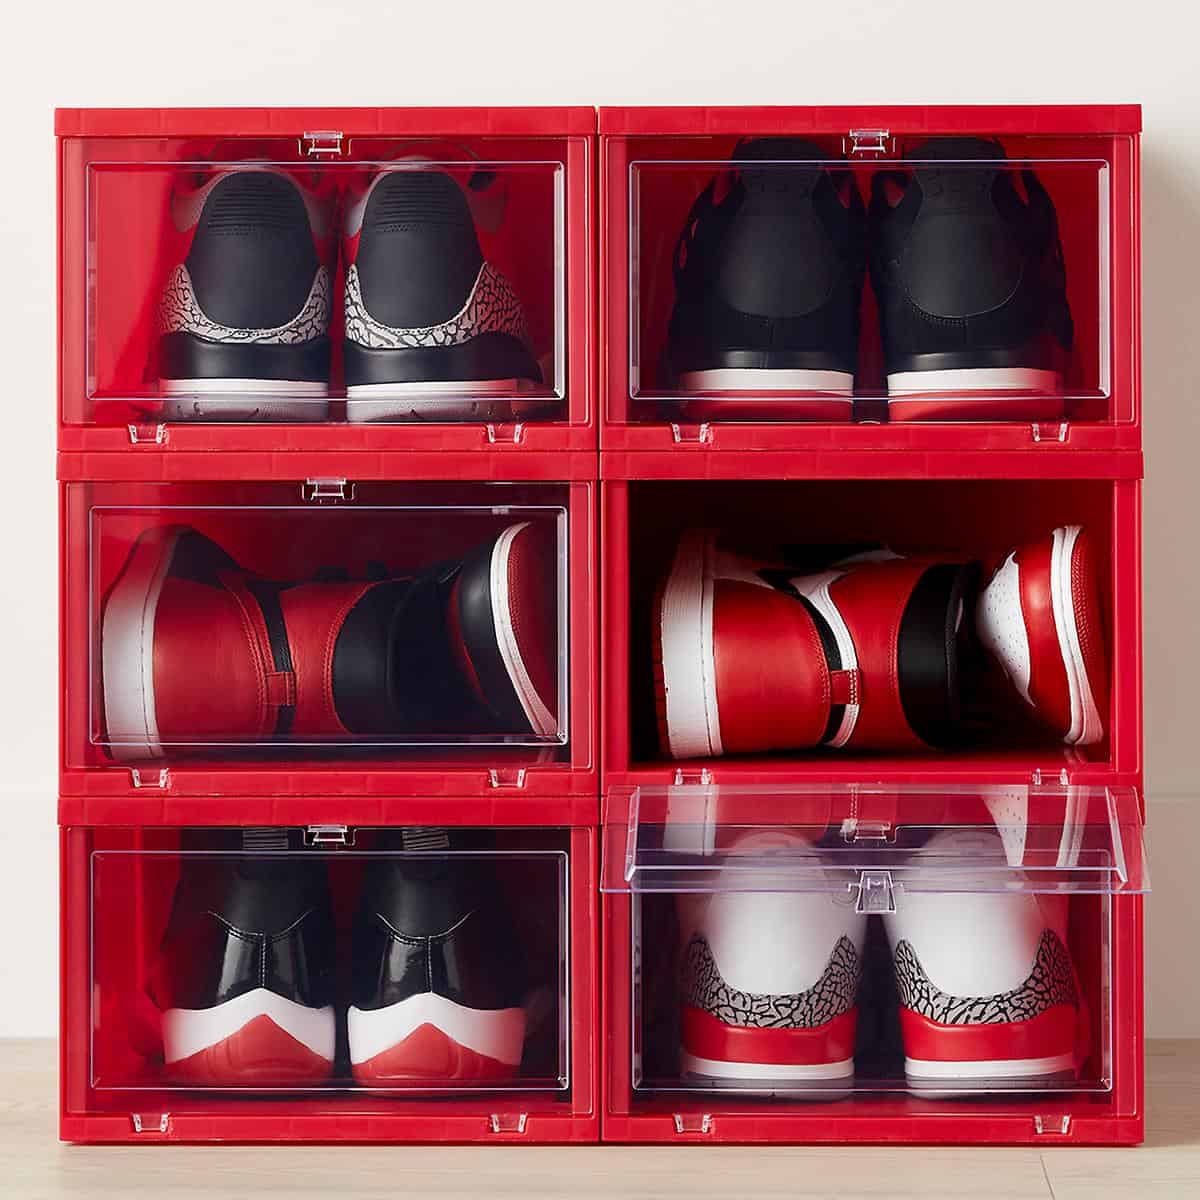 Shoe Containers Are Great For Storing Shoes In Closets